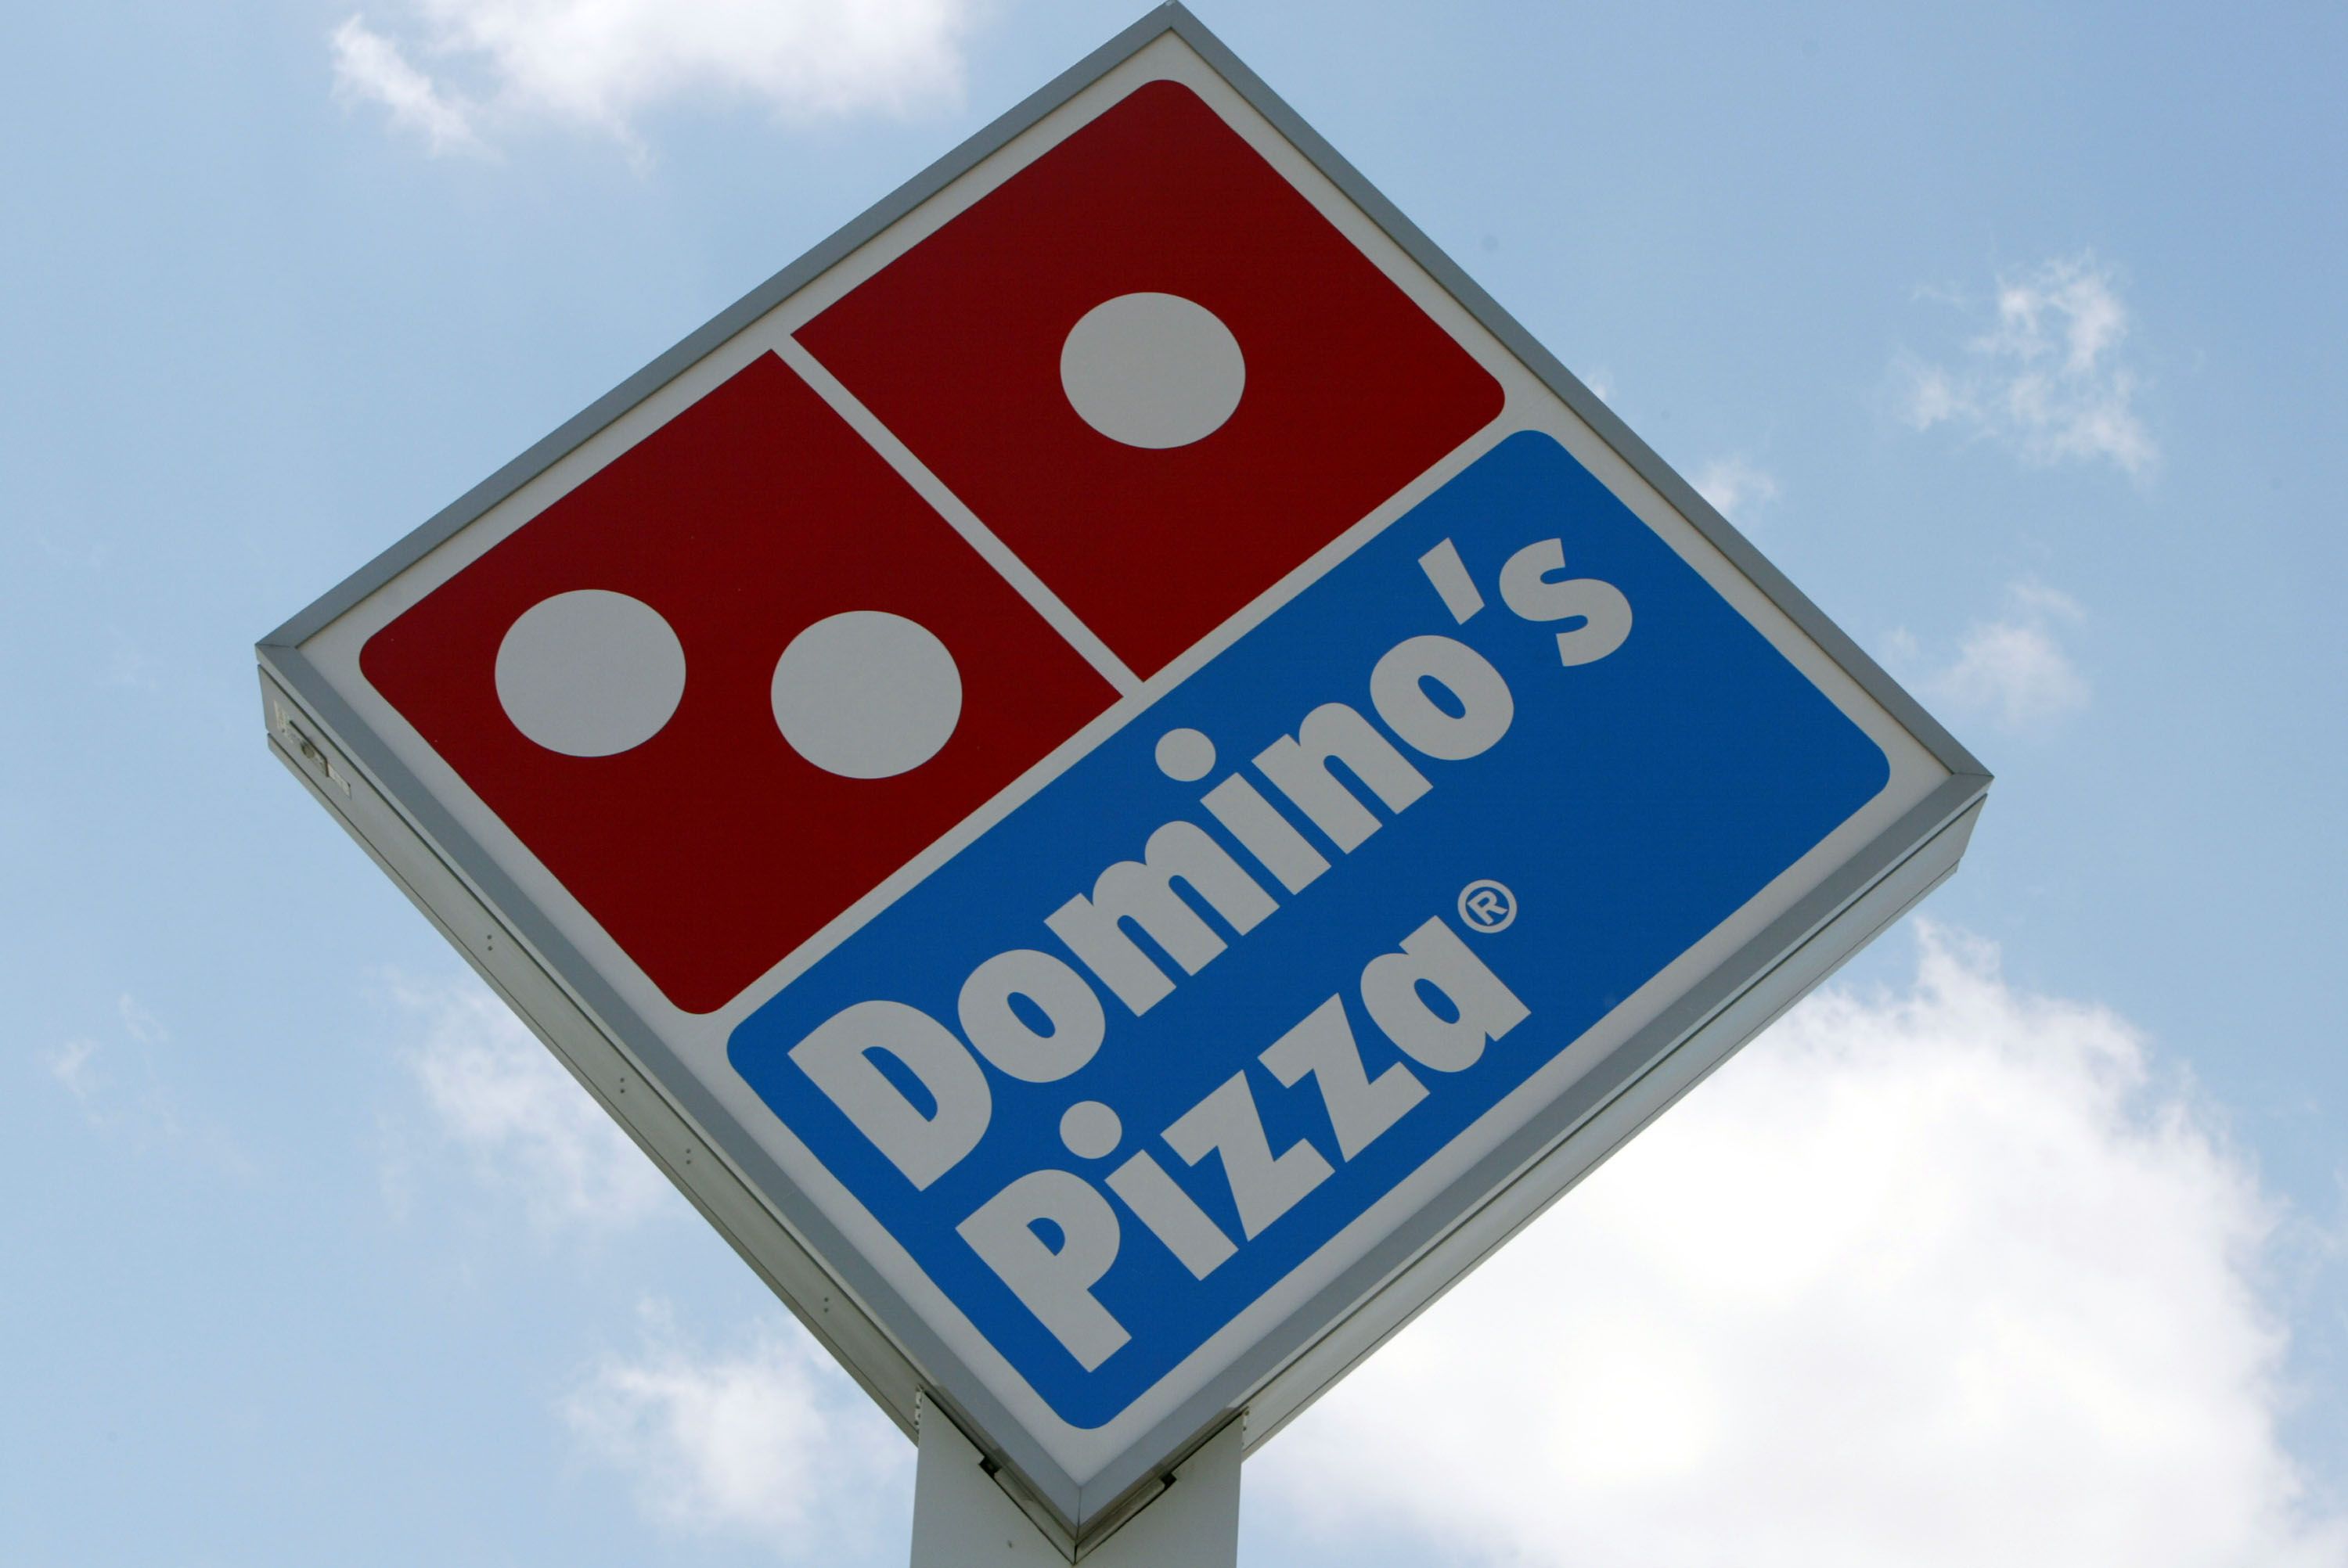 File:Domino's Pizza box from South Africa.jpg - Wikimedia Commons